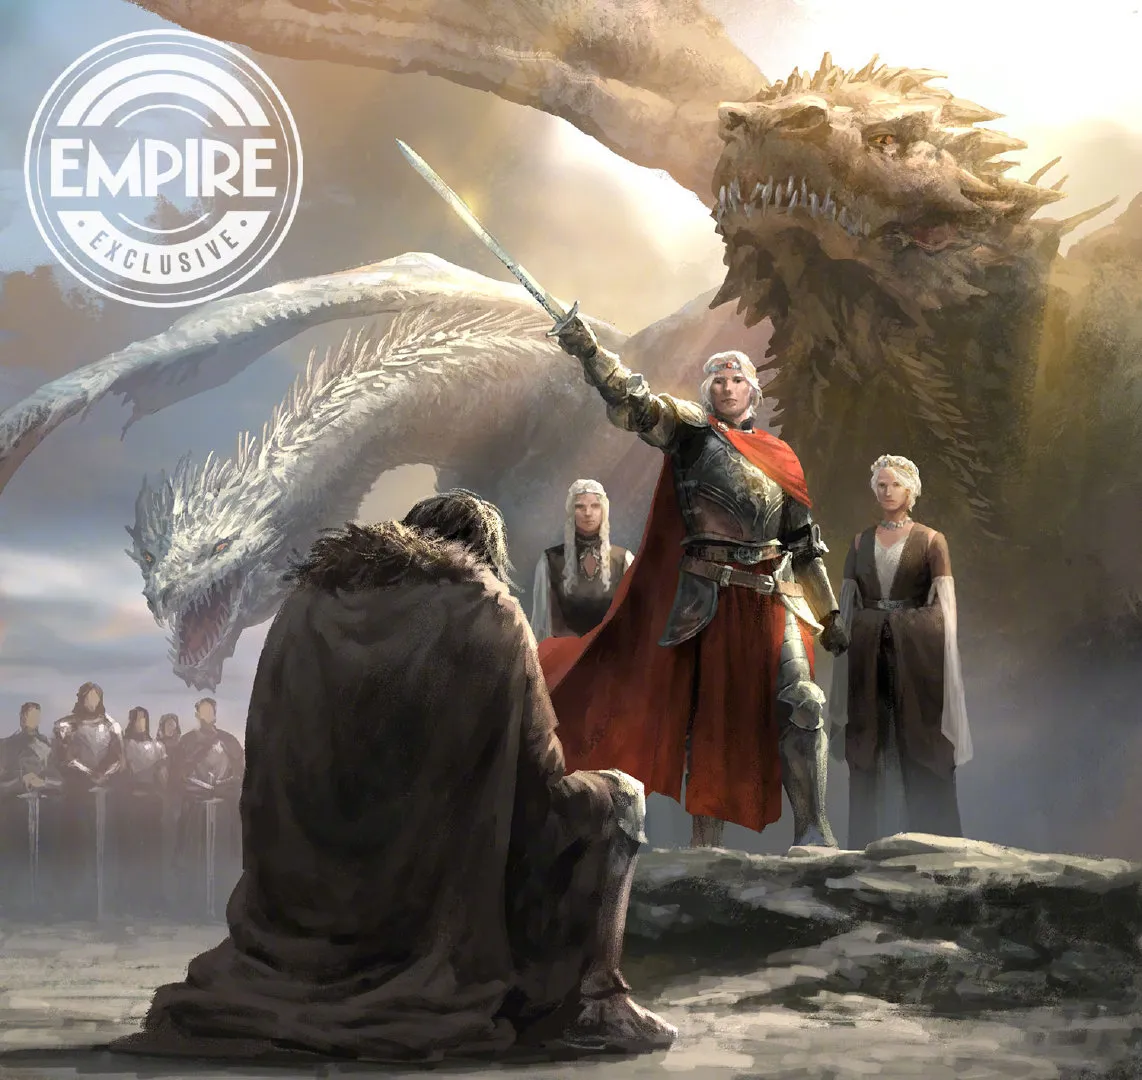 Images of 'The Rise of the Dragon: An Illustrated History of the Targaryen Dynasty' | FMV6